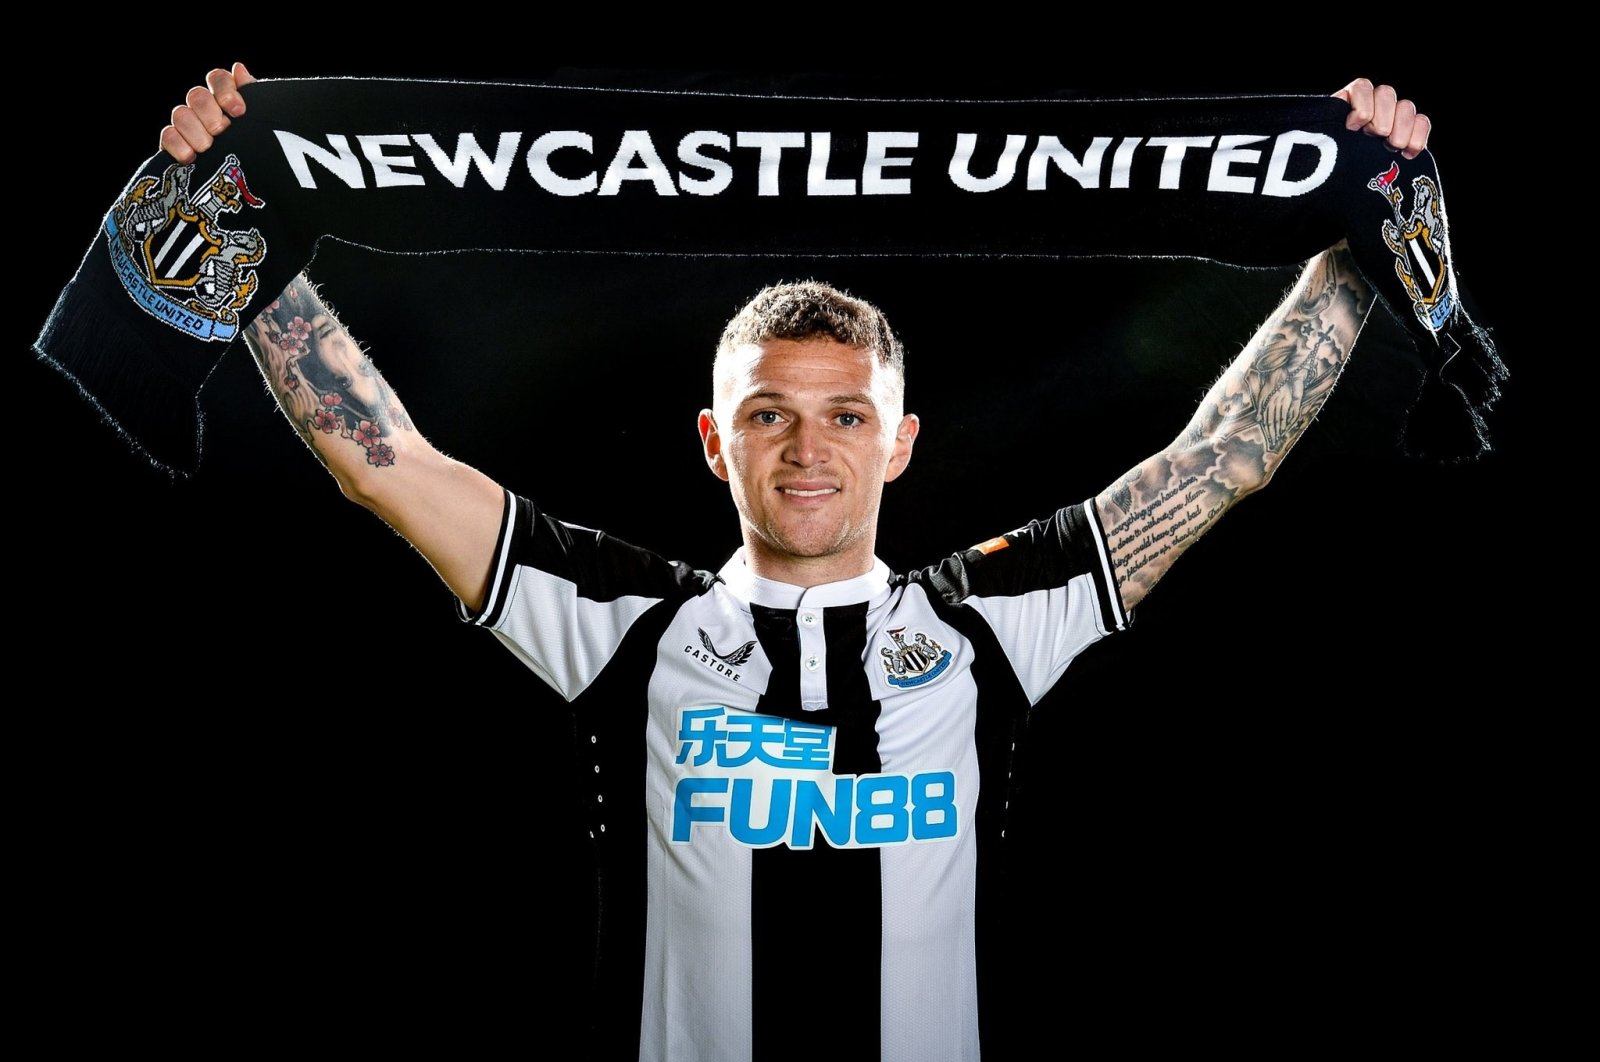 English footballer Kieran Trippier poses in Newcastle shirt after signing for the club, Newcastle, England, Jan. 7, 2022. (IHA Photo)